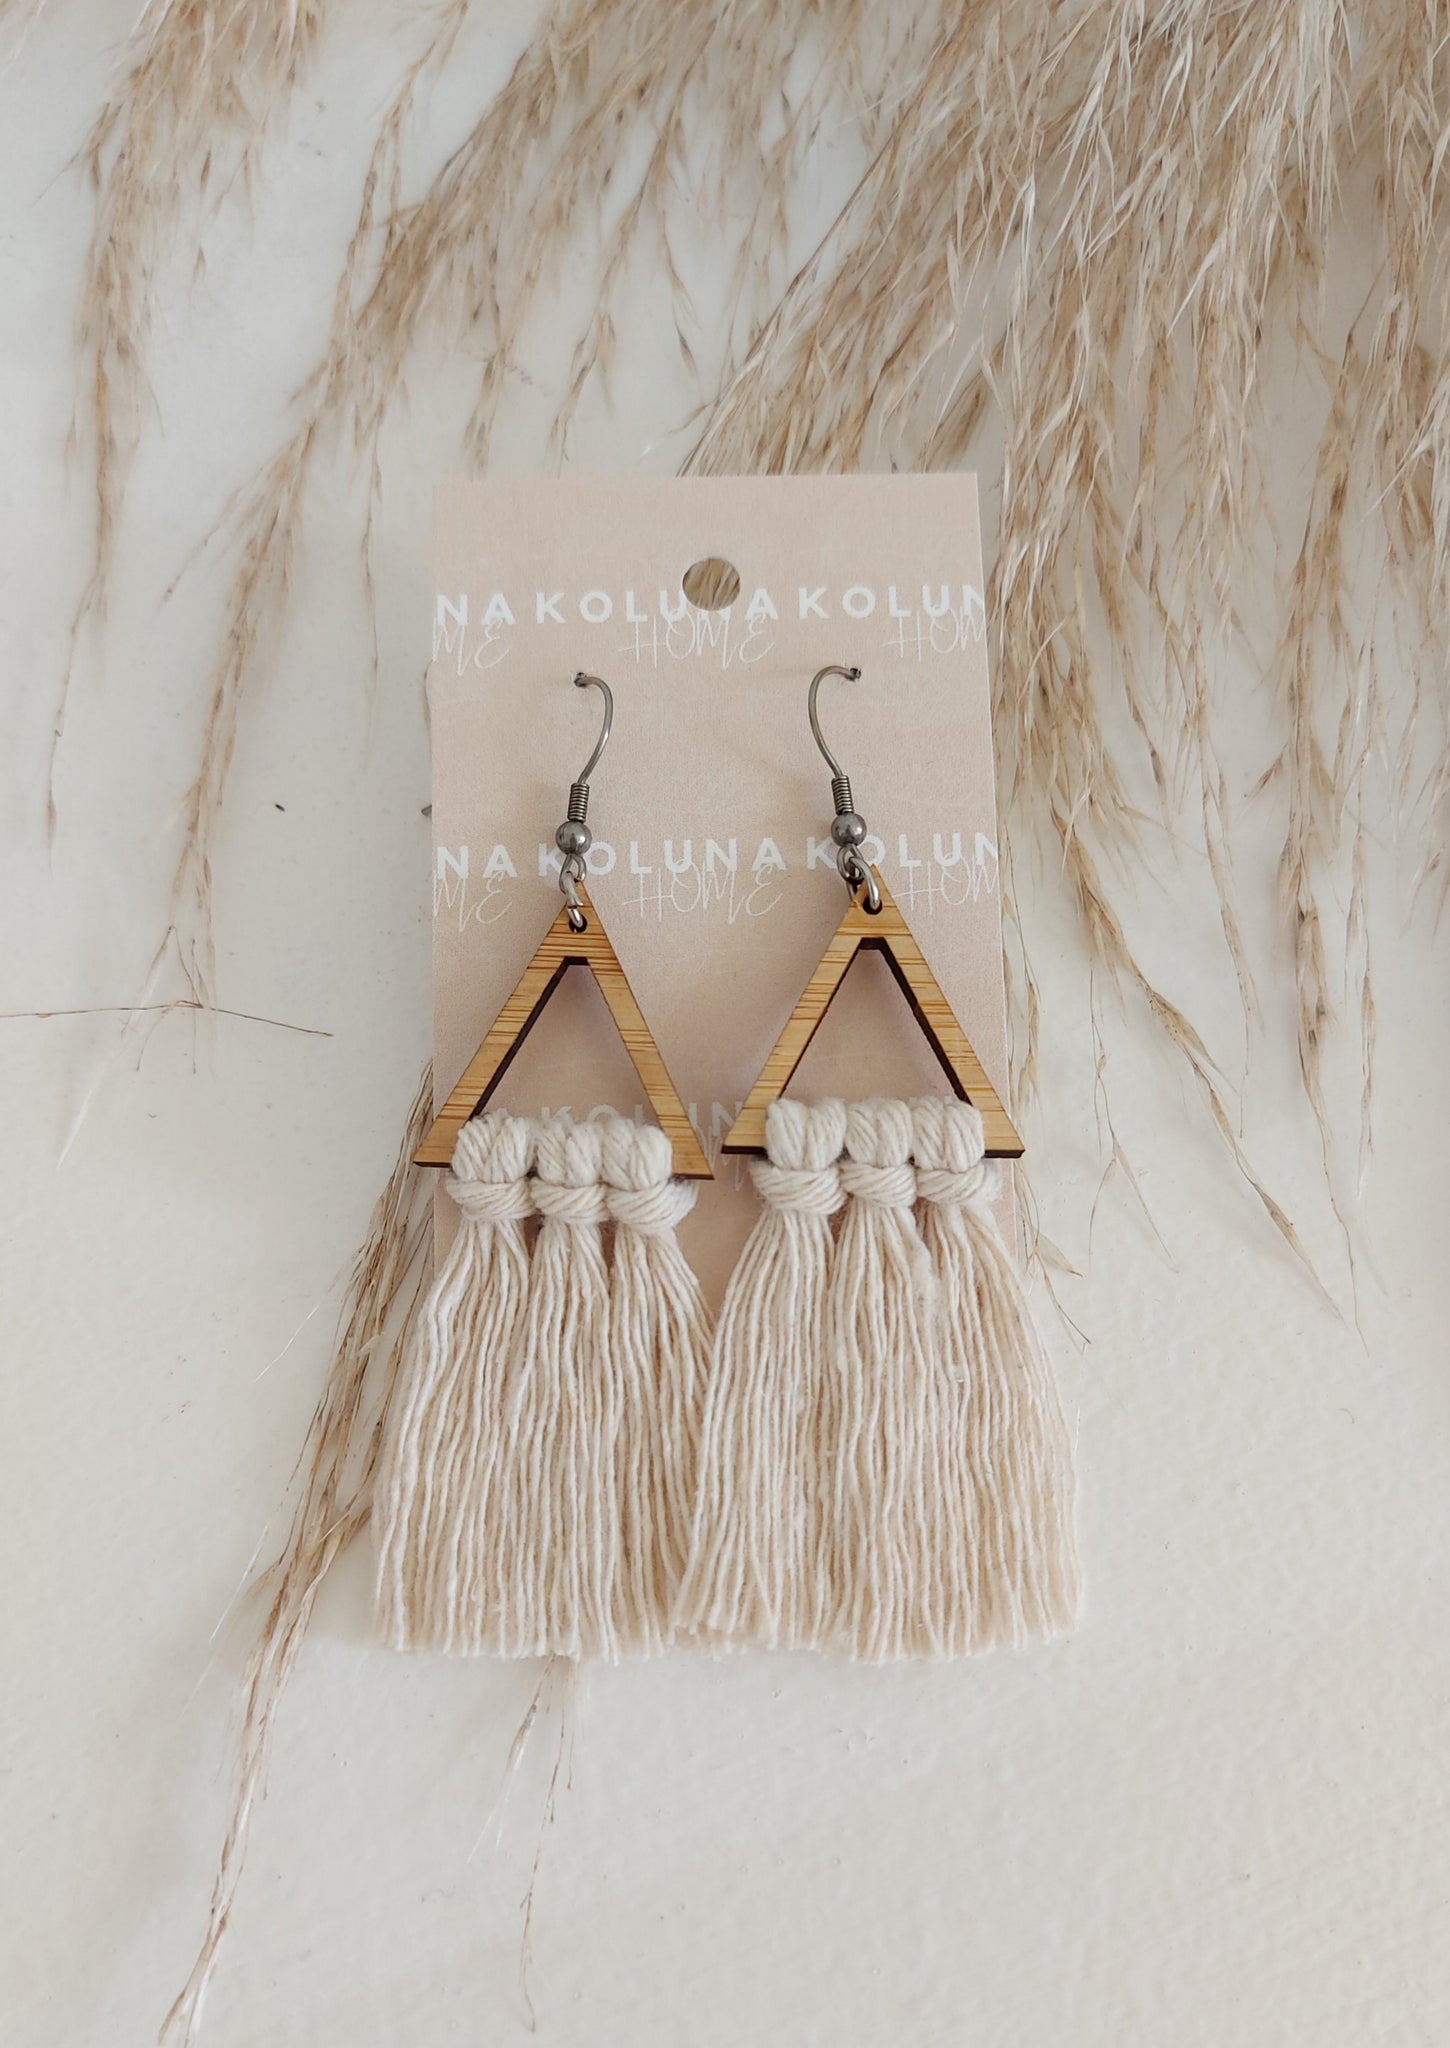 Triangle Bamboo Earrings - Natural  The Earrings that go with everything! And look gorgeous with our matching Macrame clutch/cross body bags.  Details and materials:  Triangle shape lightweight bamboo frame  Rope is 100% Recycled Cotton Hooks are surgical steel  Handmade in NZ